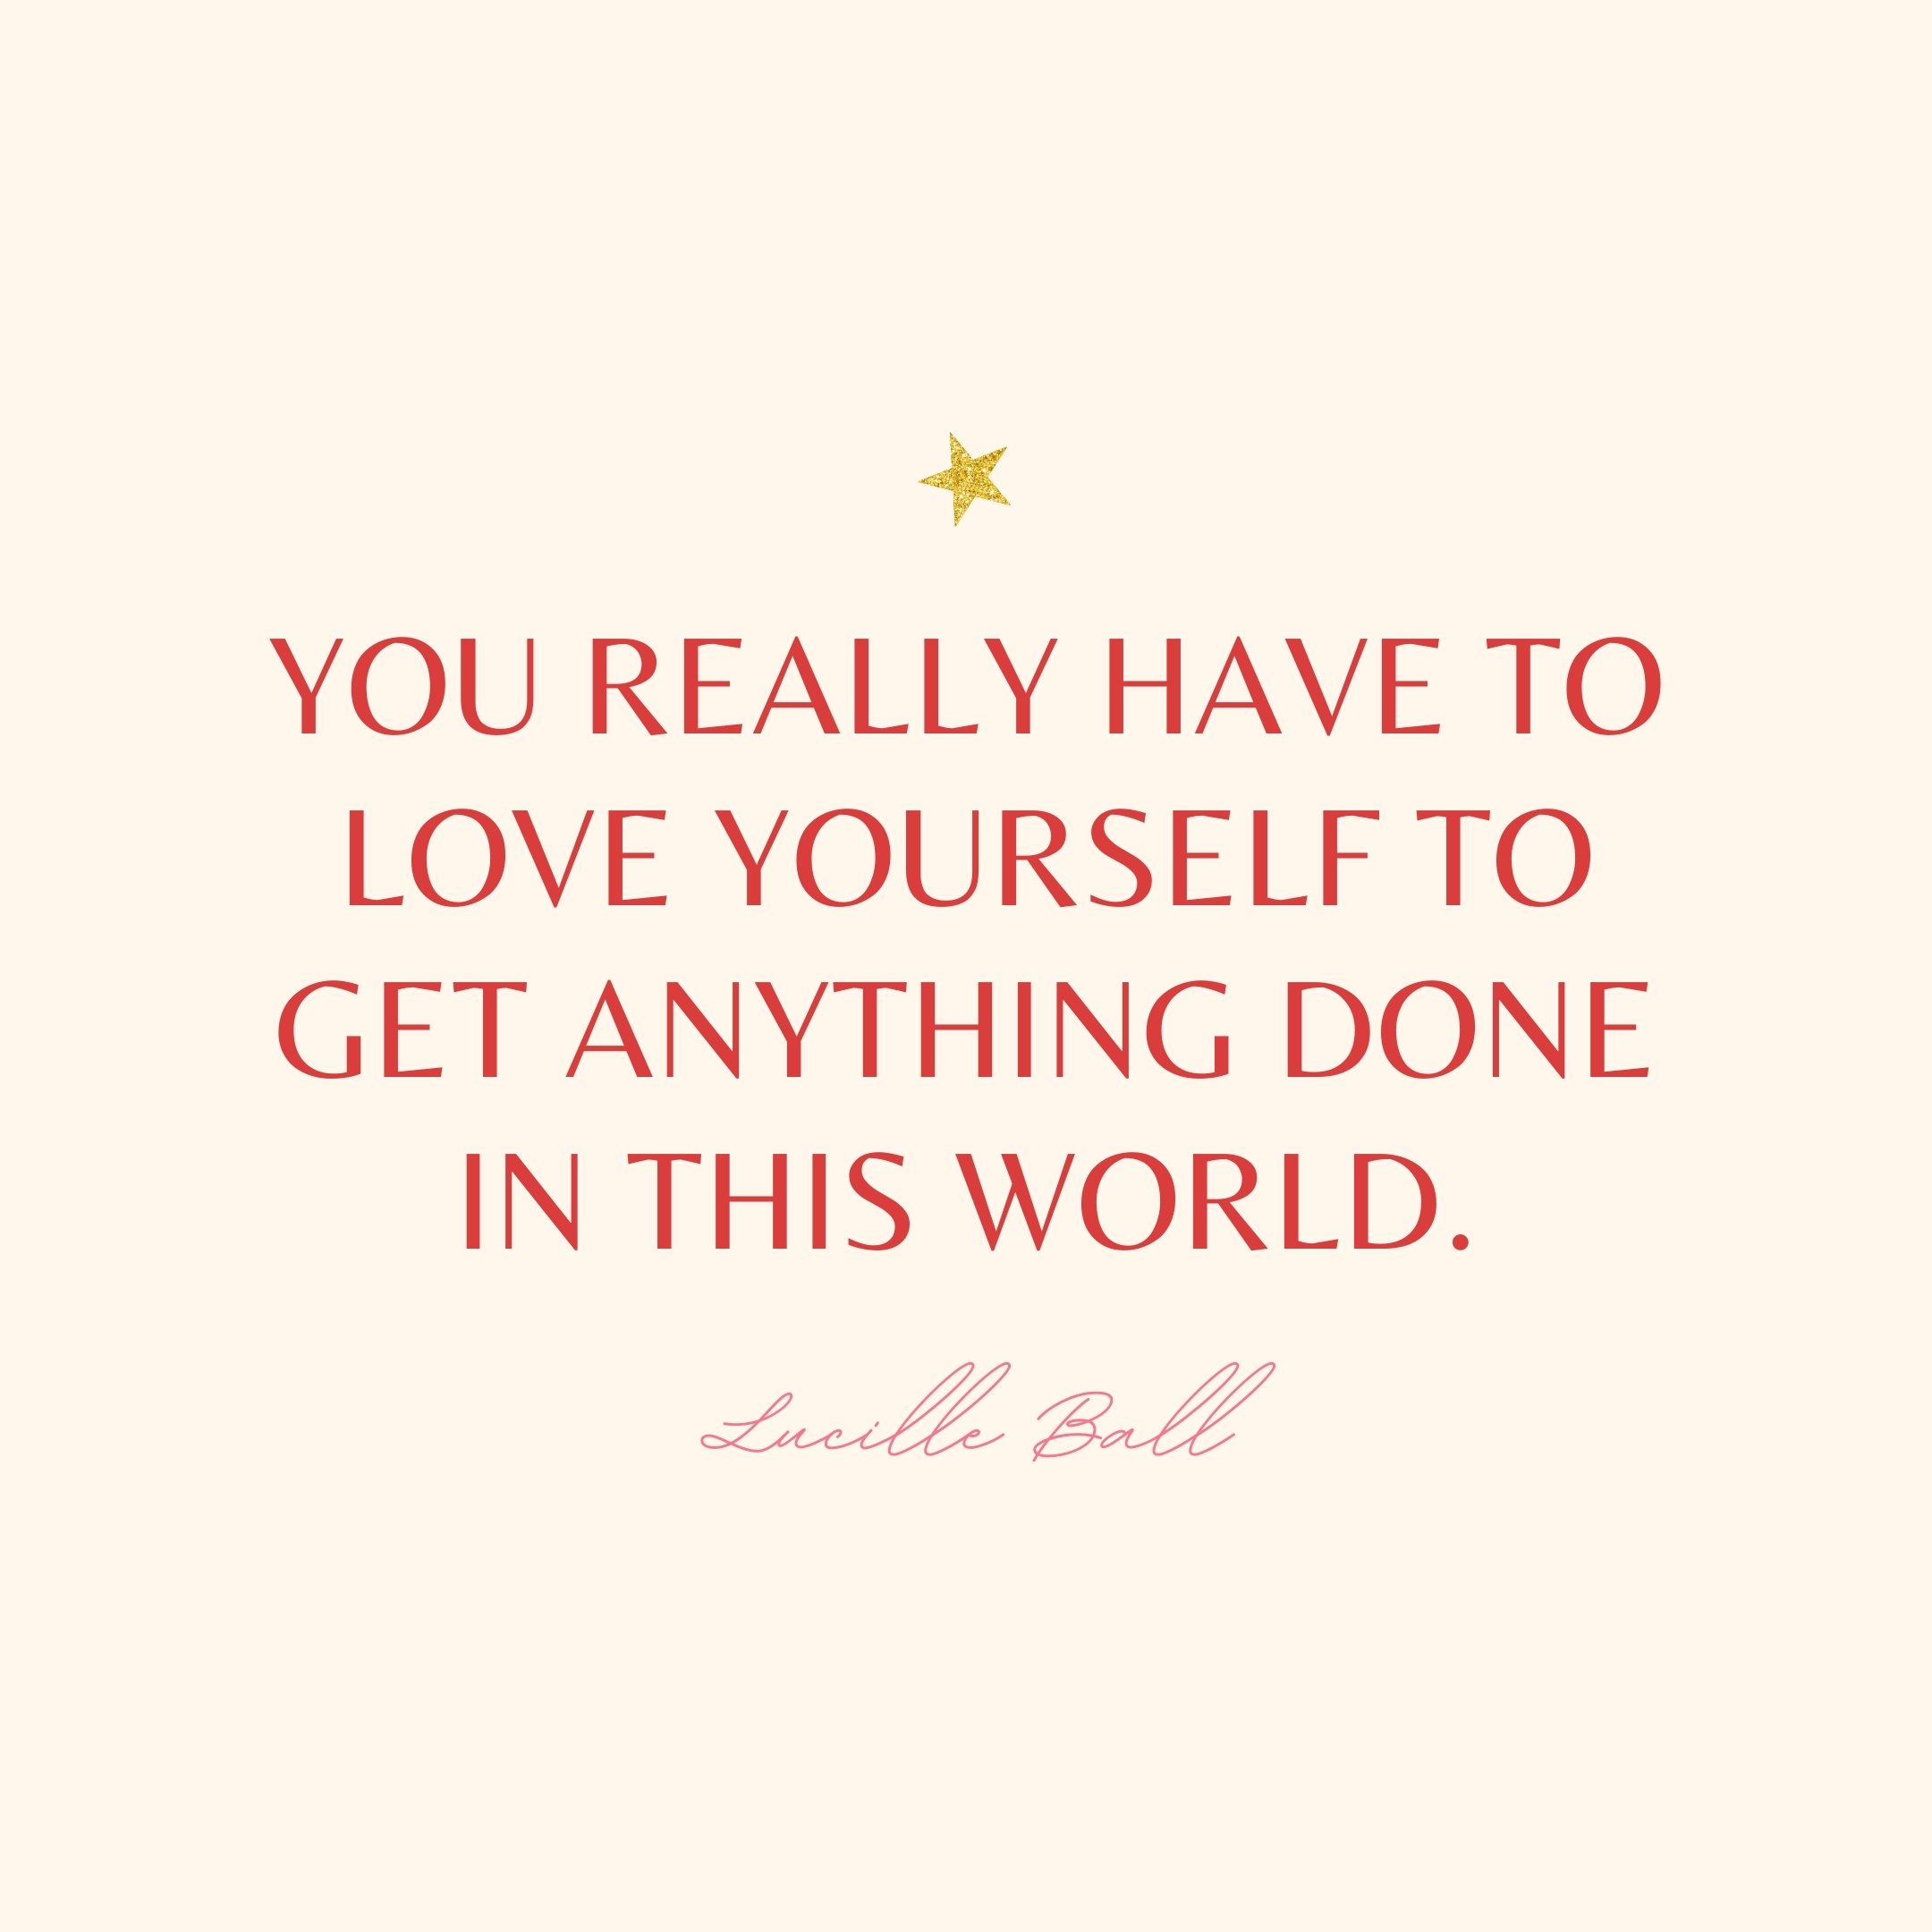 Lucille Ball | Monday Motivation Quotes